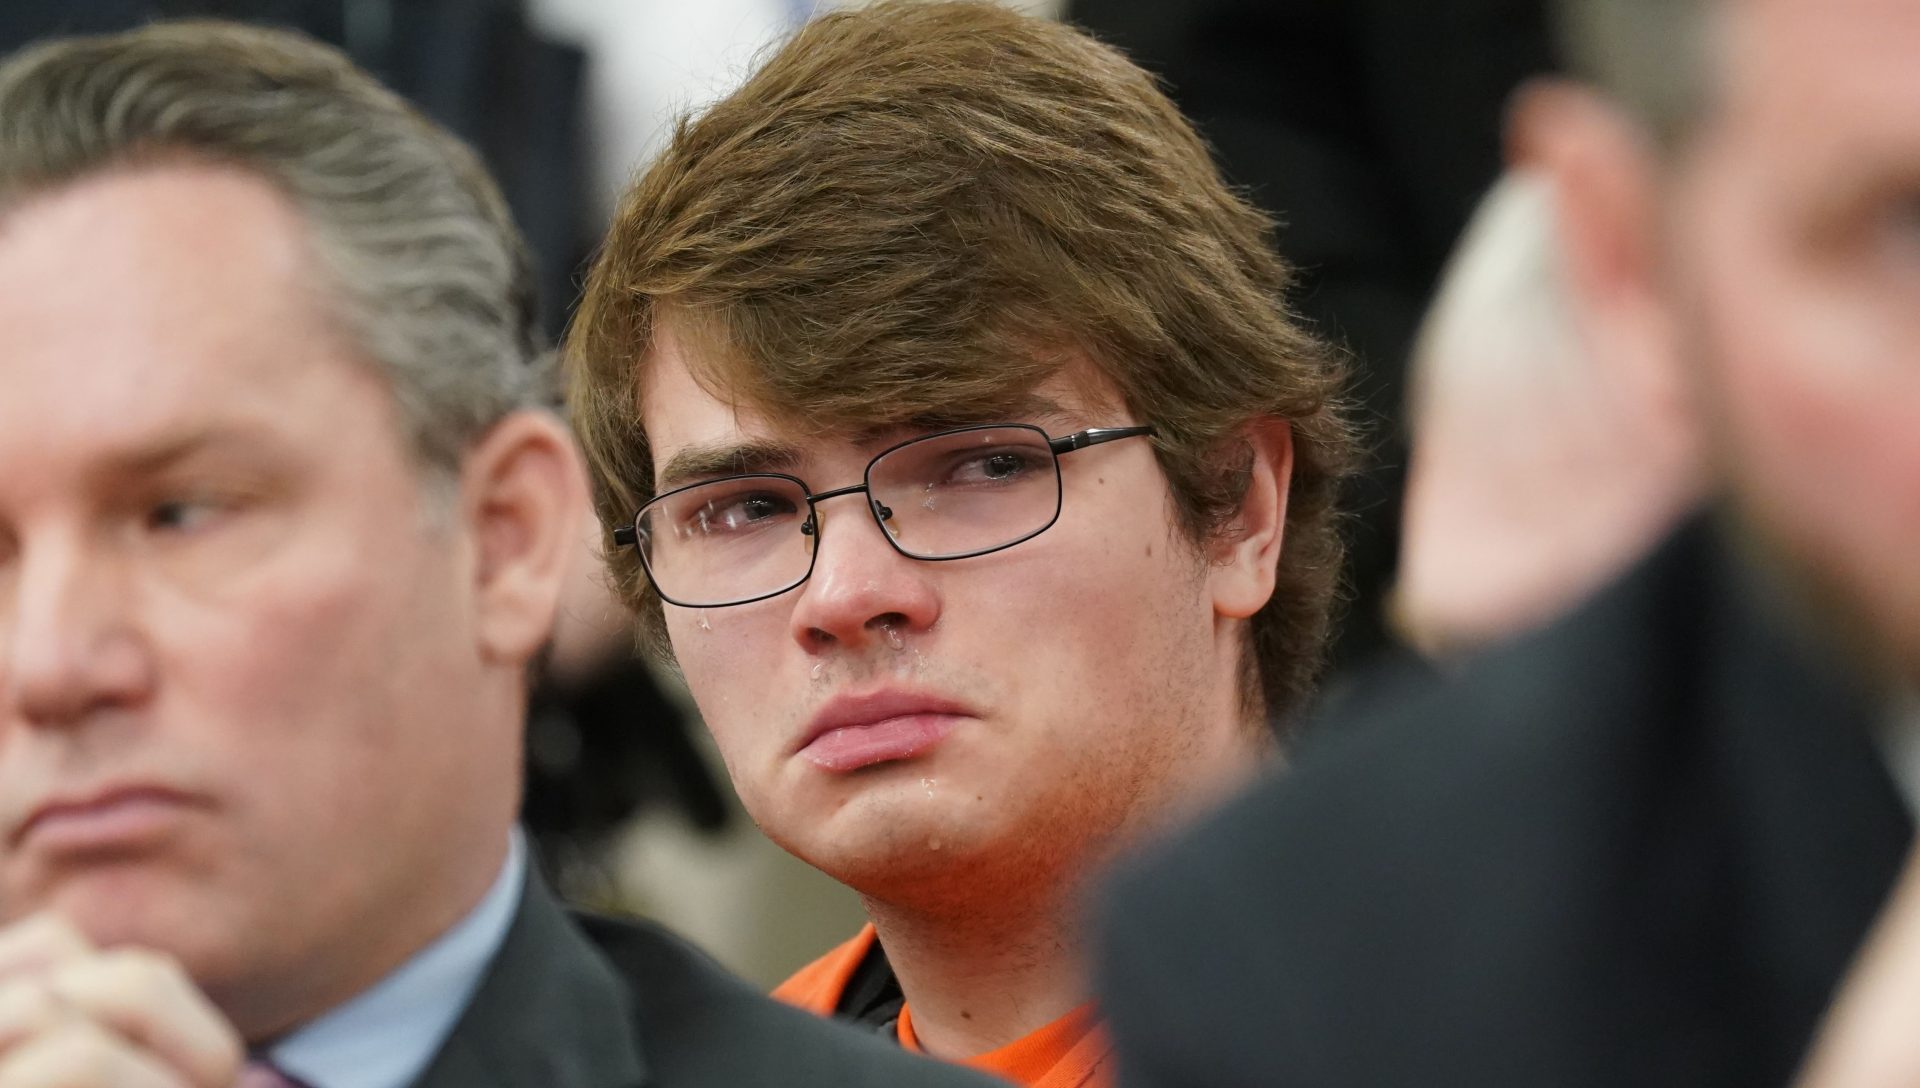 Payton Gendron (C) weeps as he listens to the impact statement of family members of the victims and survivors in Buffalo, New York State, the United States, on Feb. 15, 2023. The 19-year-old man Payton Gendron, who committed the mass shooting last May in Buffalo of the U.S. state of New York, was sentenced to life in prison without parole on Wednesday as expected while white supremacy got bashed at court.